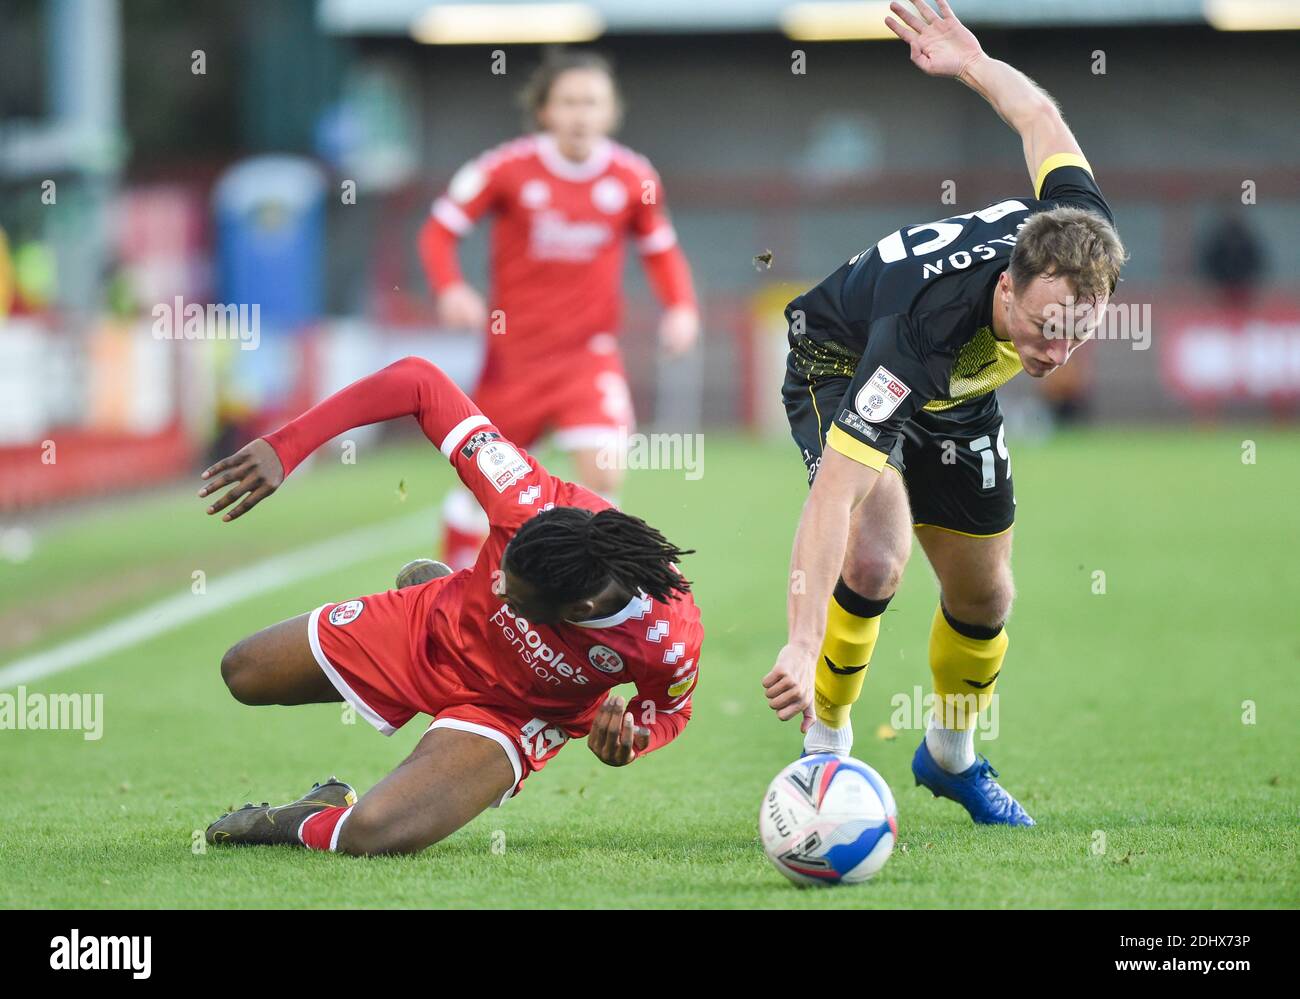 Crawley UK 12th December 2020 - David Sesay of Crawley is bundled over by Scott Wilson of Barrow during the Sky Bet EFL League Two match between Crawley Town and Barrow AFC  at the People's Pension Stadium - Editorial use only. No merchandising.  - for details contact Football Dataco  : Credit Simon Dack TPI / Alamy Live News Stock Photo